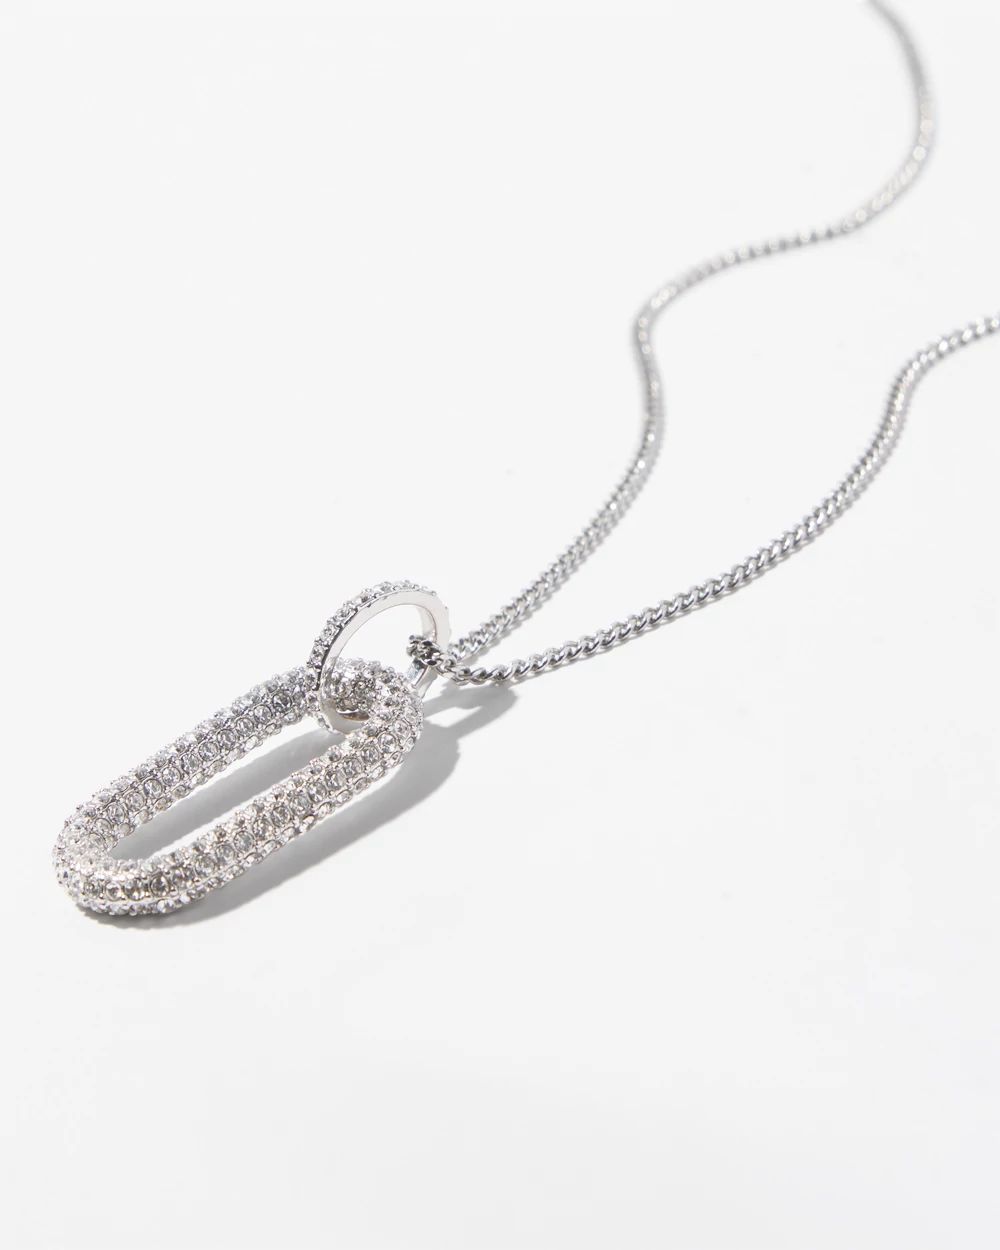 Silver Crystal Pave Ring Pendant Necklace click to view larger image.